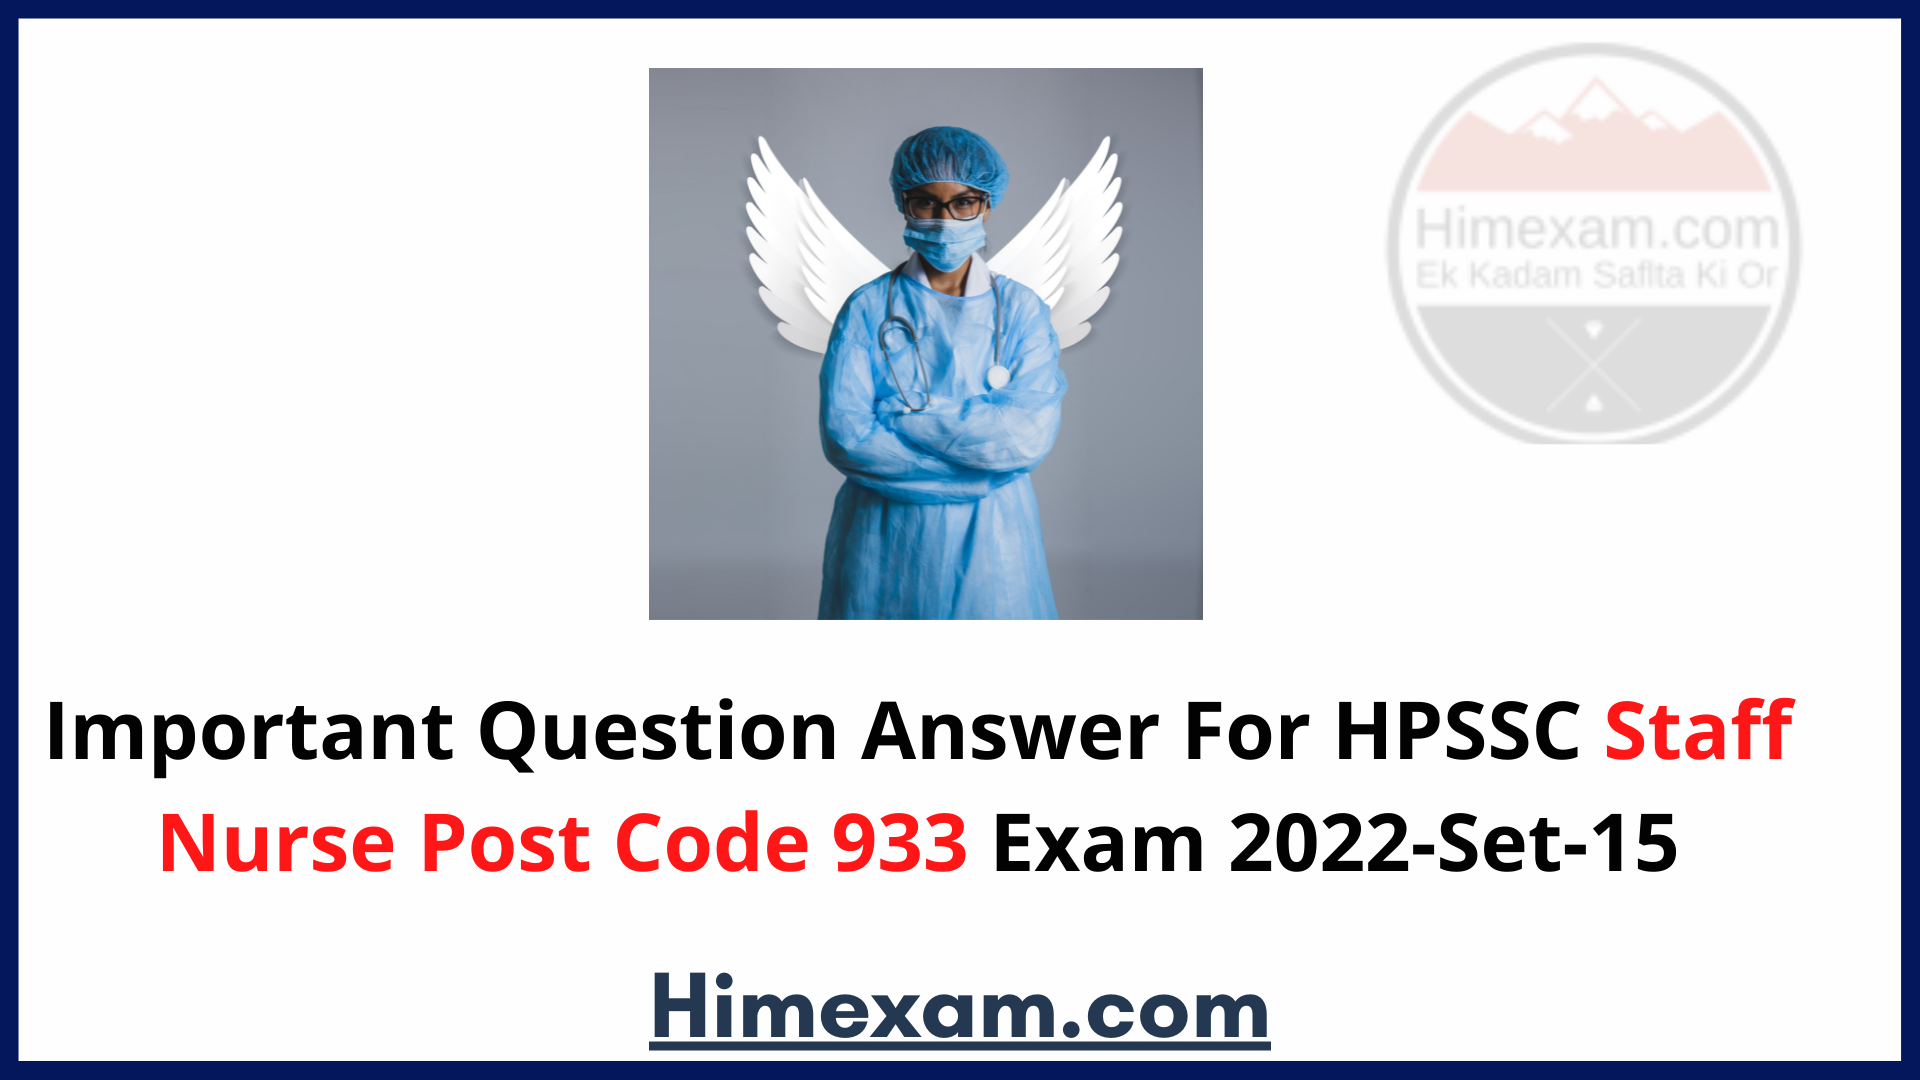 Important Question Answer  For HPSSC Staff Nurse Post Code 933 Exam 2022-Set-15